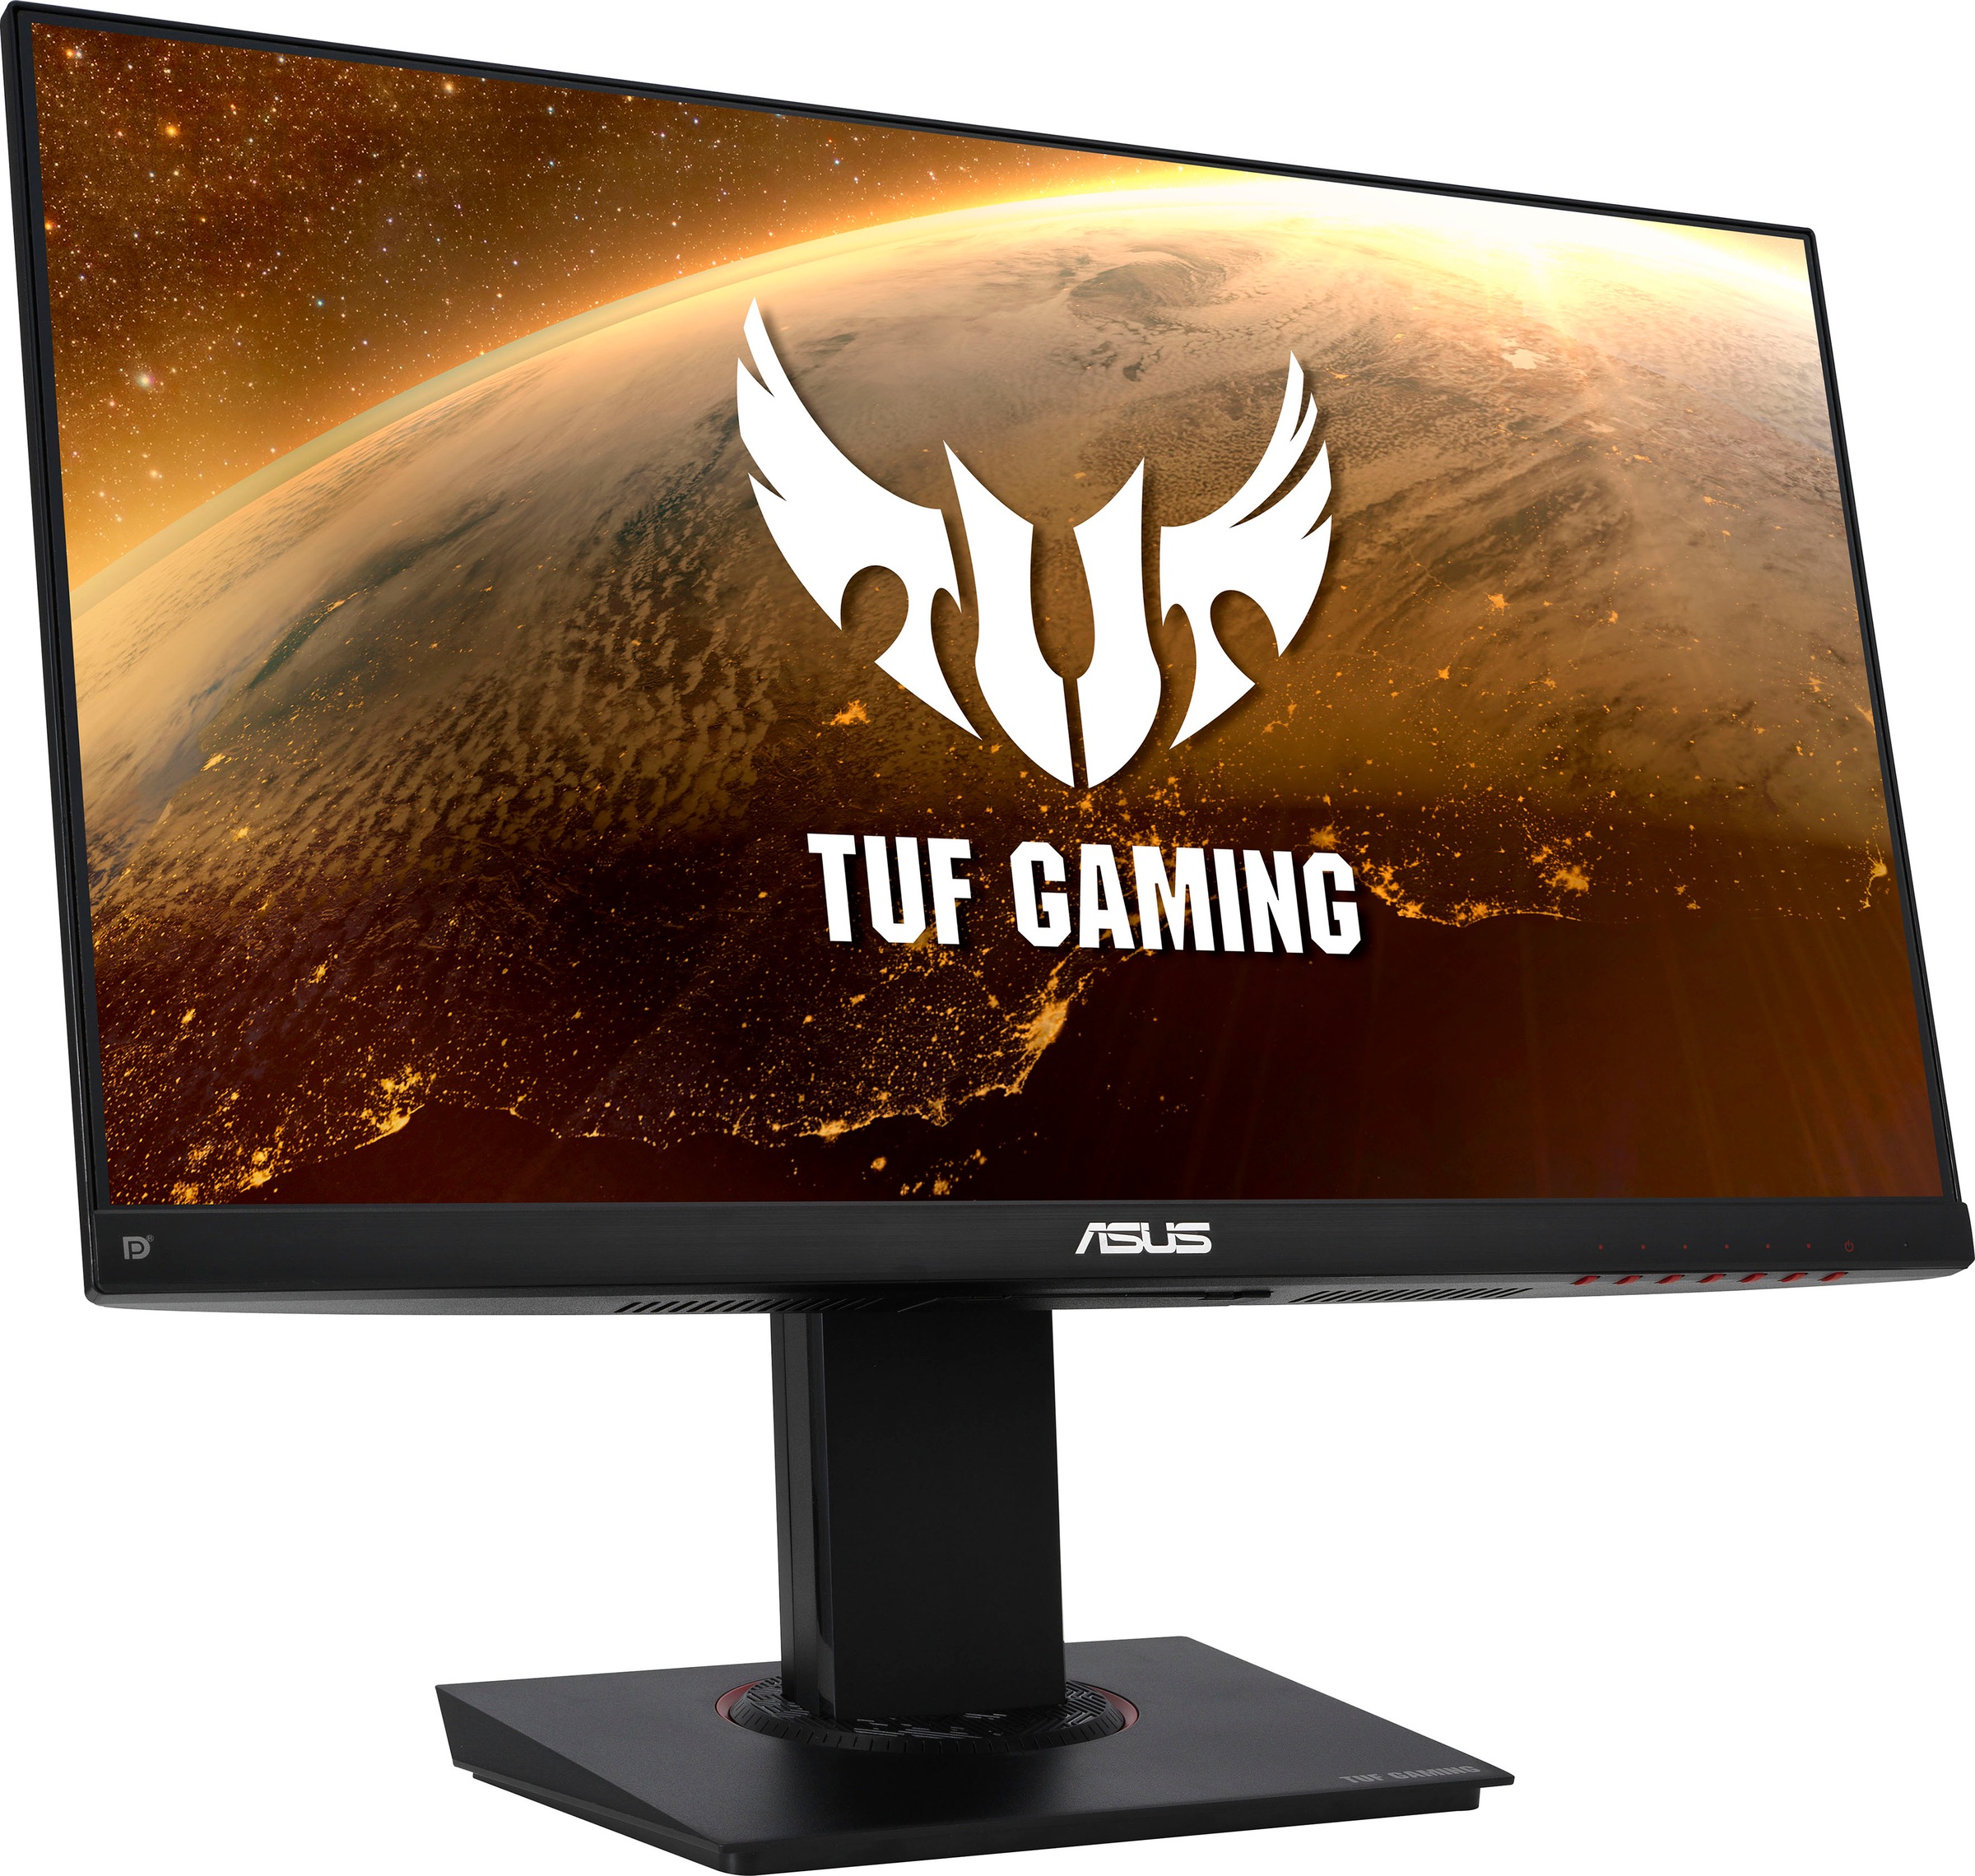 Asus Gaming-Monitor »VG249Q«, 61 cm/24 Zoll, 1920 x 1080 px, Full HD, 1 ms Reaktionszeit, 144 Hz